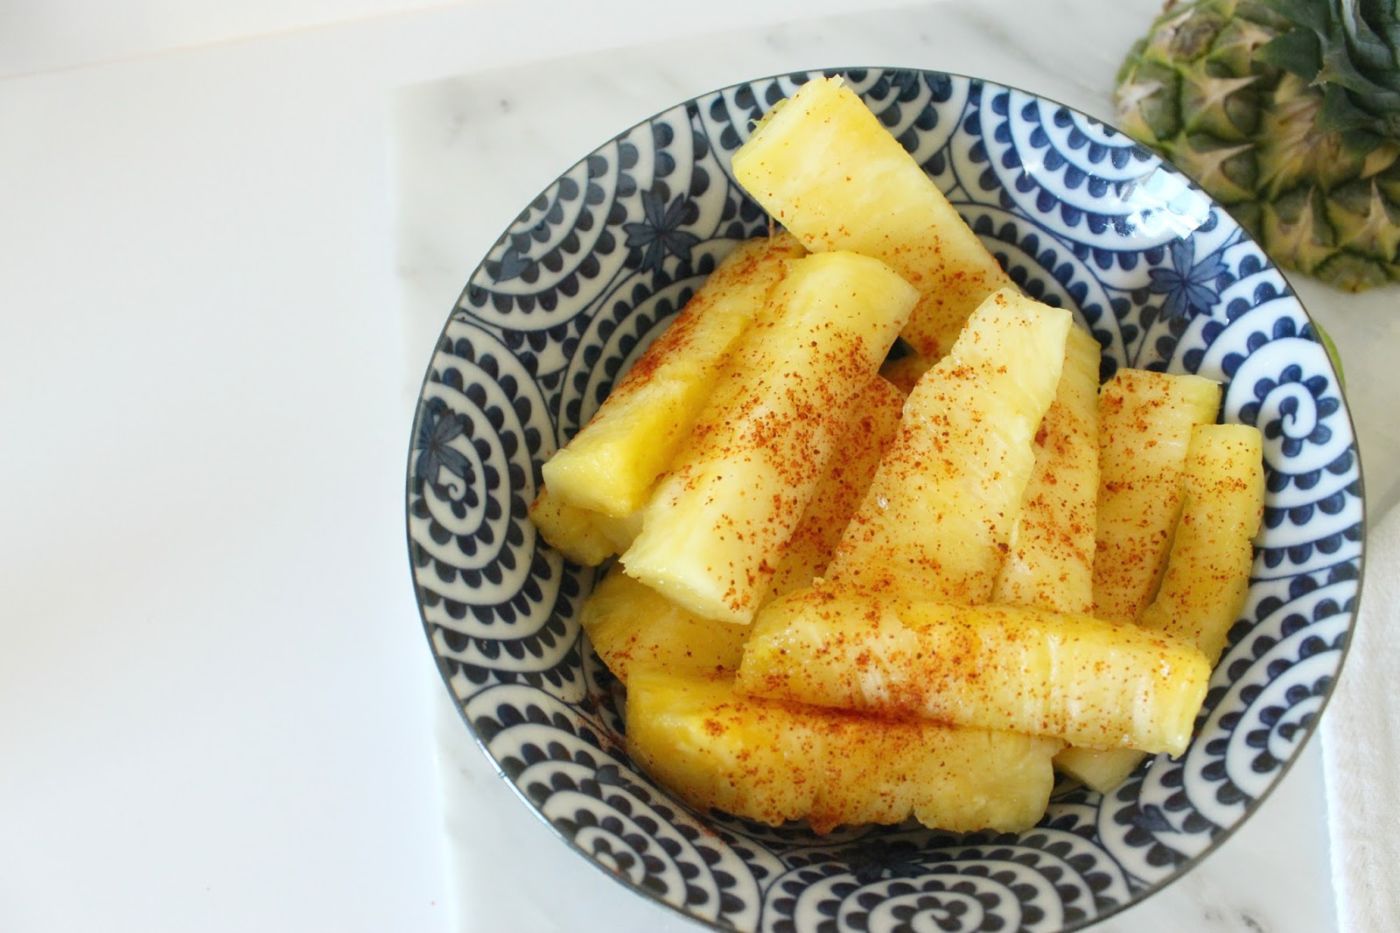 Cayenne Pineapple Wedges